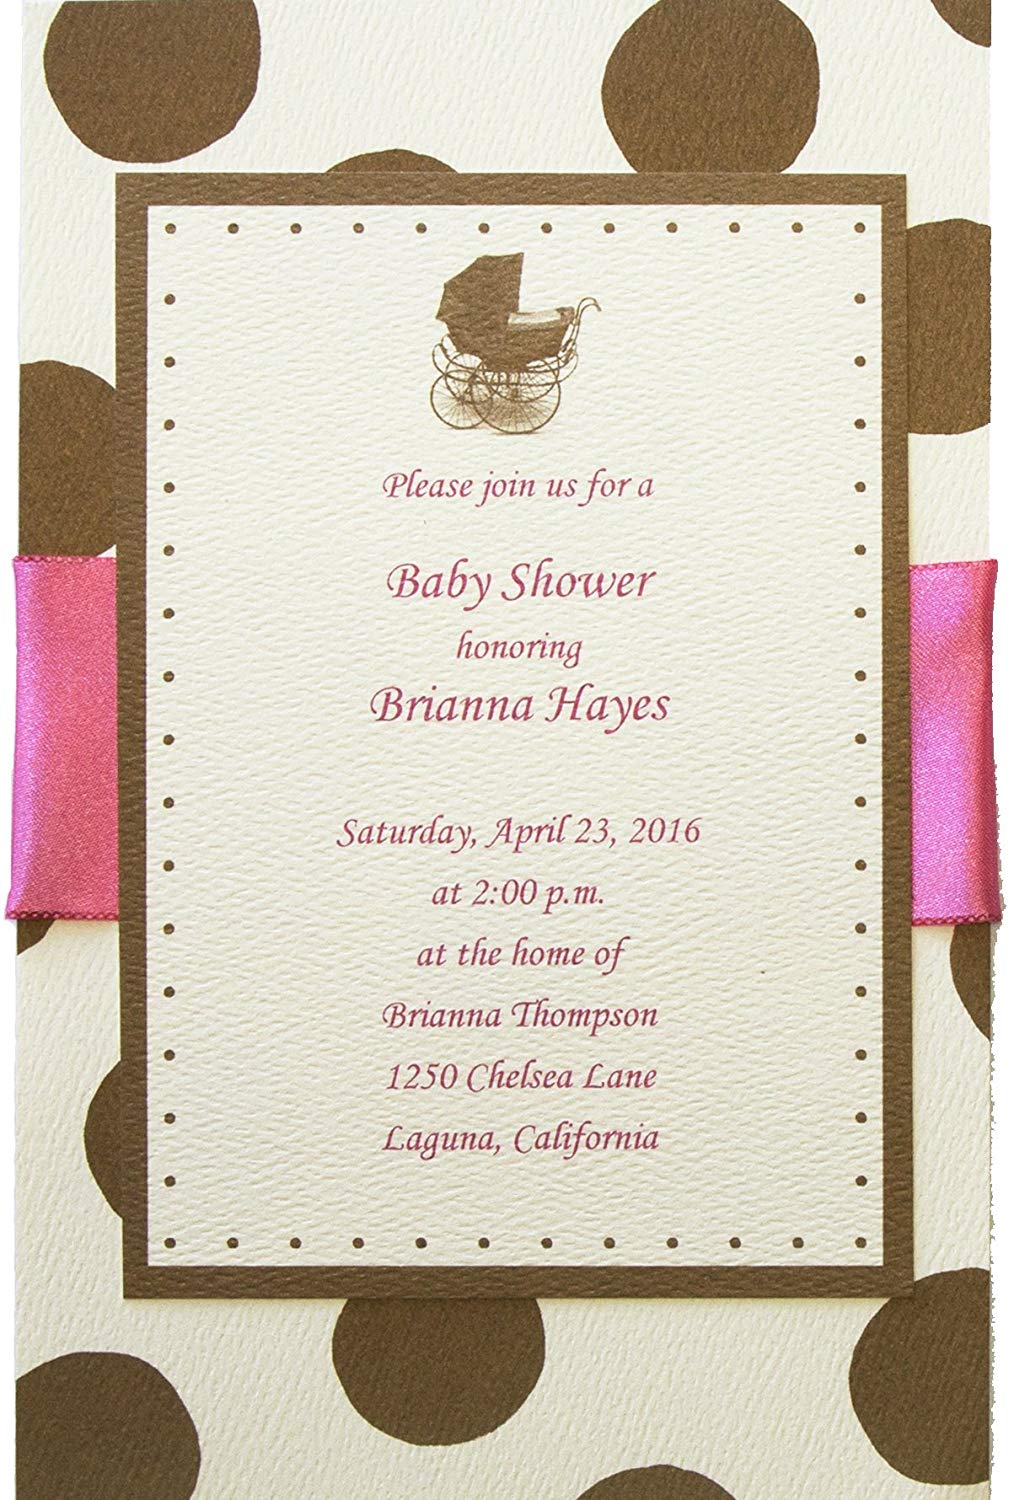 Full Size of Baby Shower:unique Baby Shower Ideas Pinterest Baby Shower Ideas For Girls Baby Girl Themes For Bedroom Unique Baby Shower Decorations Nursery For Girls Baby Shower Ideas For Girls Baby Girl Themes For Baby Shower Pinterest Nursery Ideas